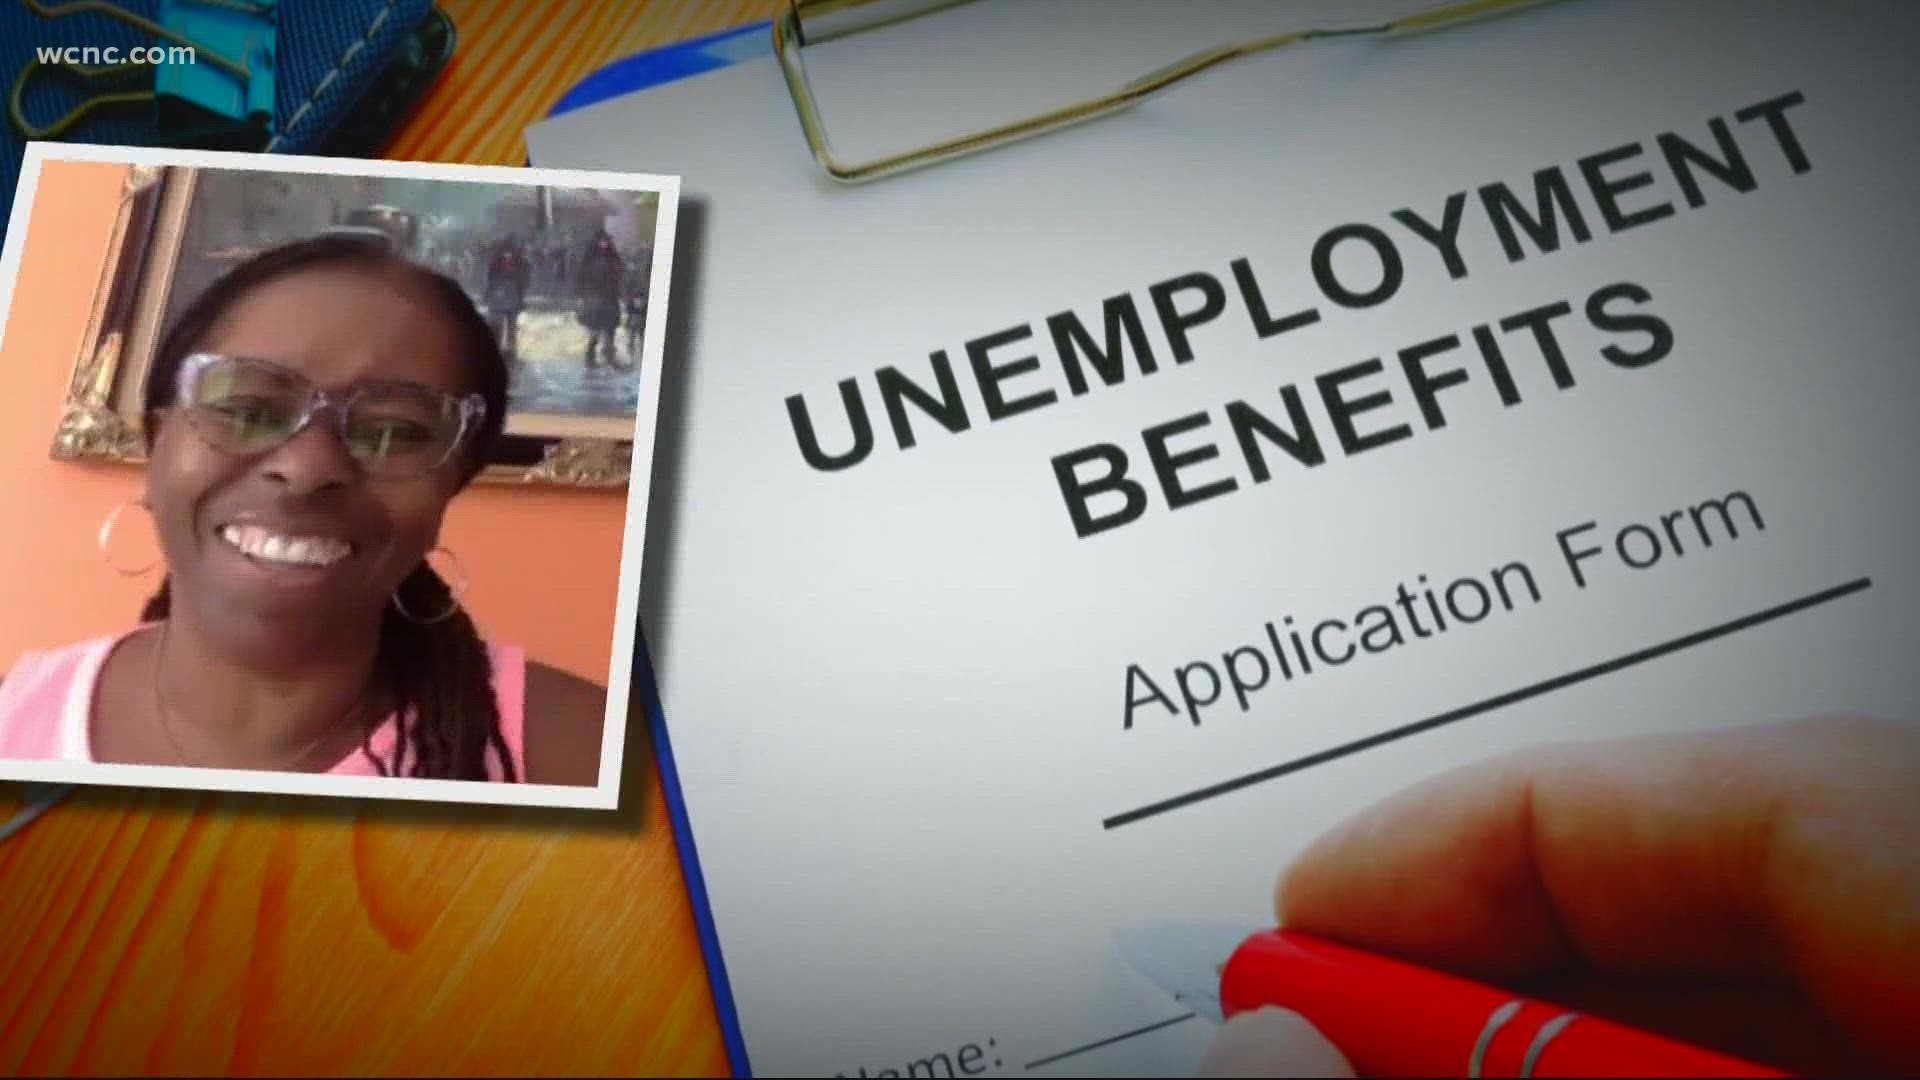 Bill McGinty shares how a woman finally got her unemployment payment after WCNC Charlotte cut through the red tape.